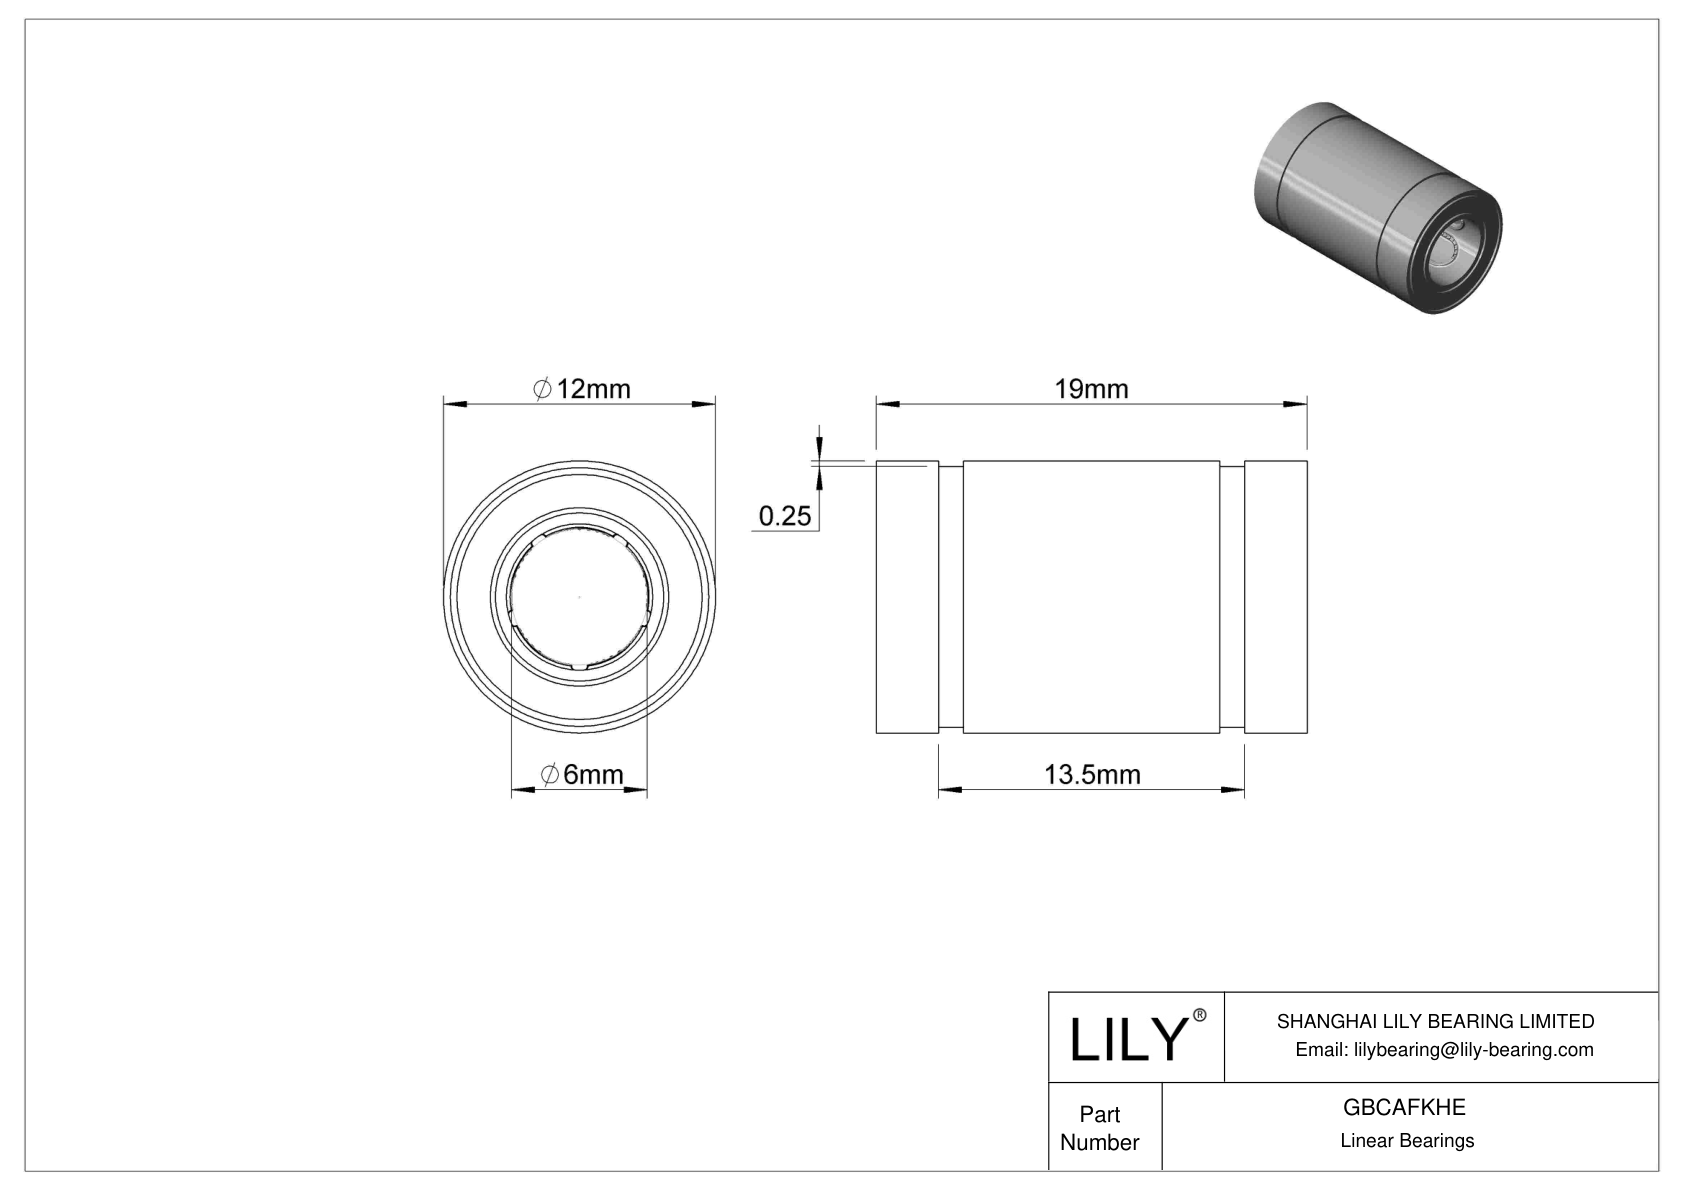 GBCAFKHE Common Linear Ball Bearings cad drawing